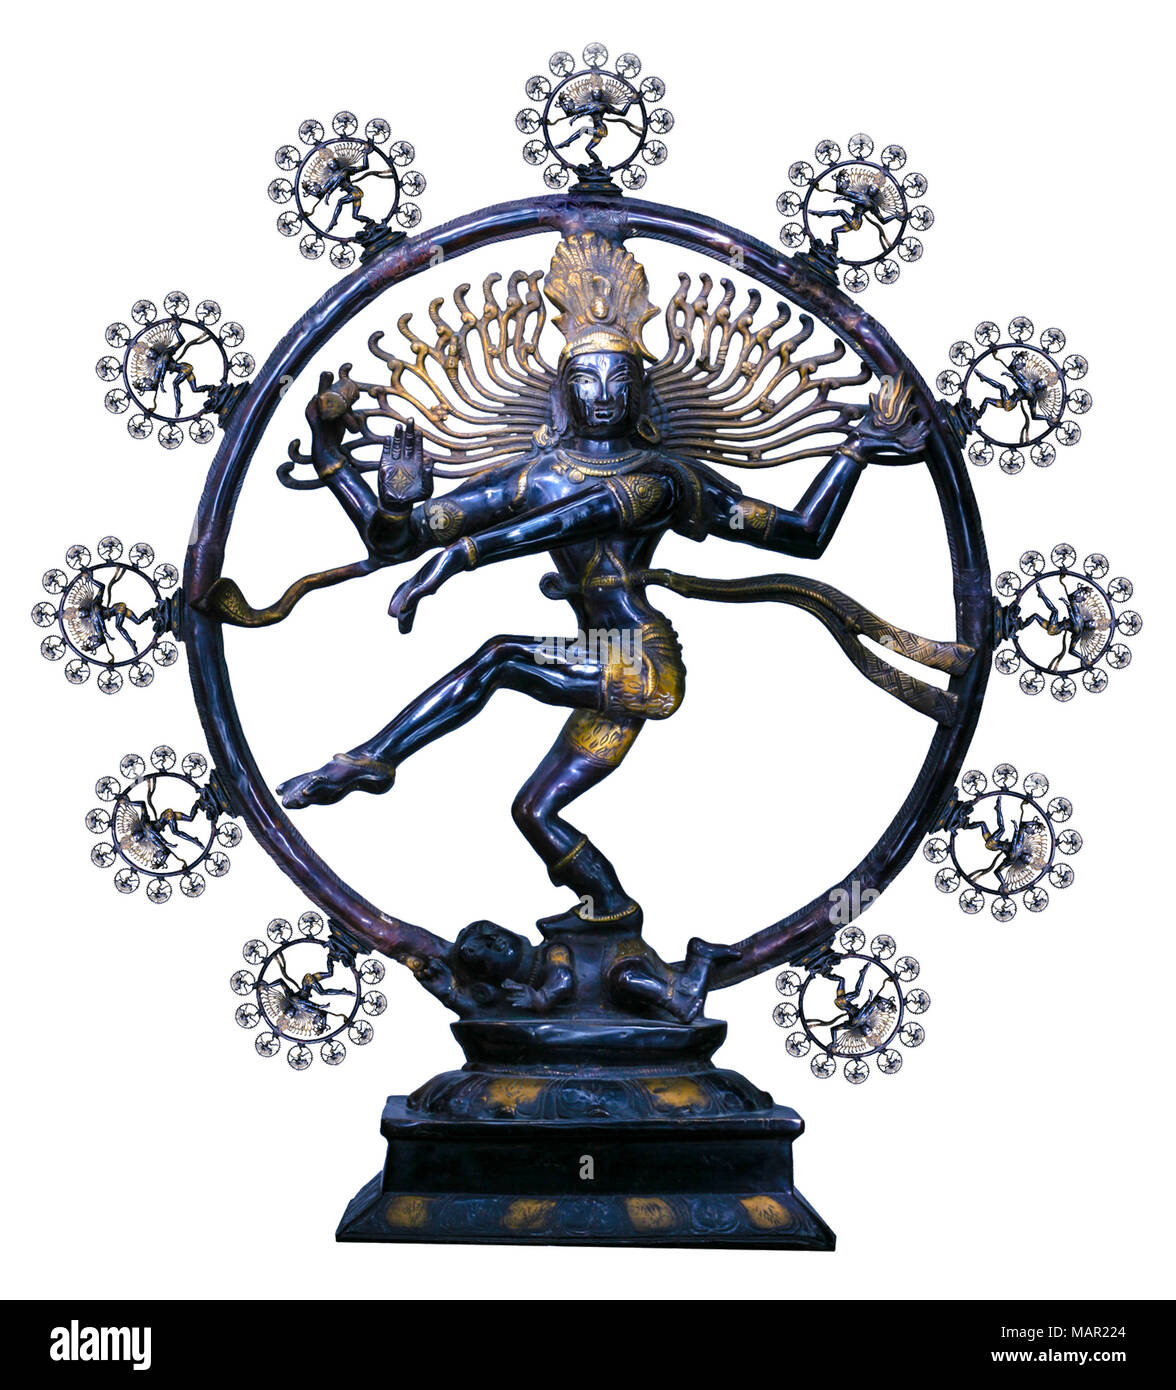 Shiva , the lord of dance depicted in the Nataraja statue Stock Photo -  Alamy